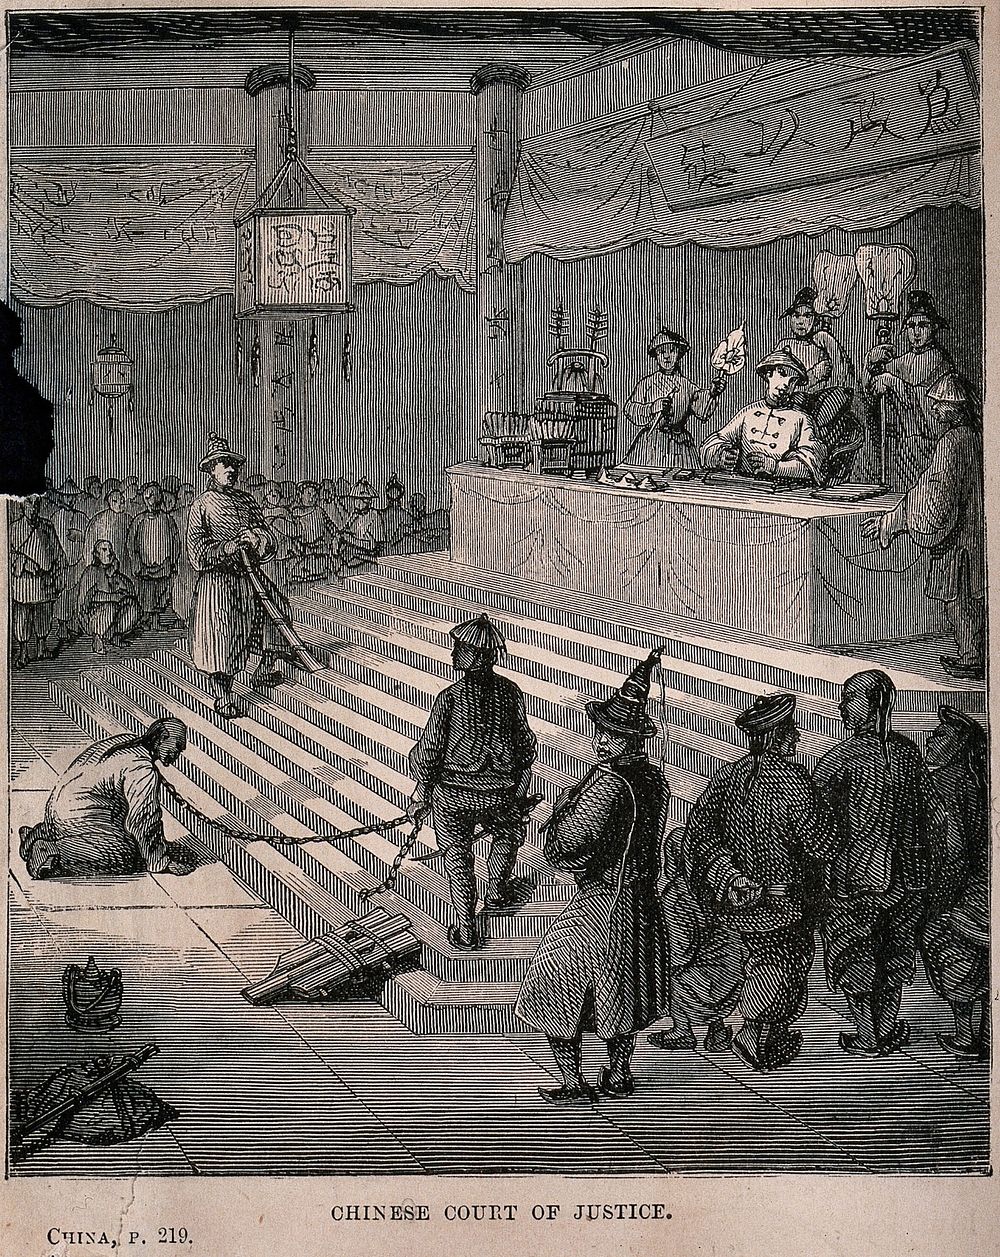 A man kneeling in front of a judge at a Chinese court of justice. Wood engraving after E. Vaumort.